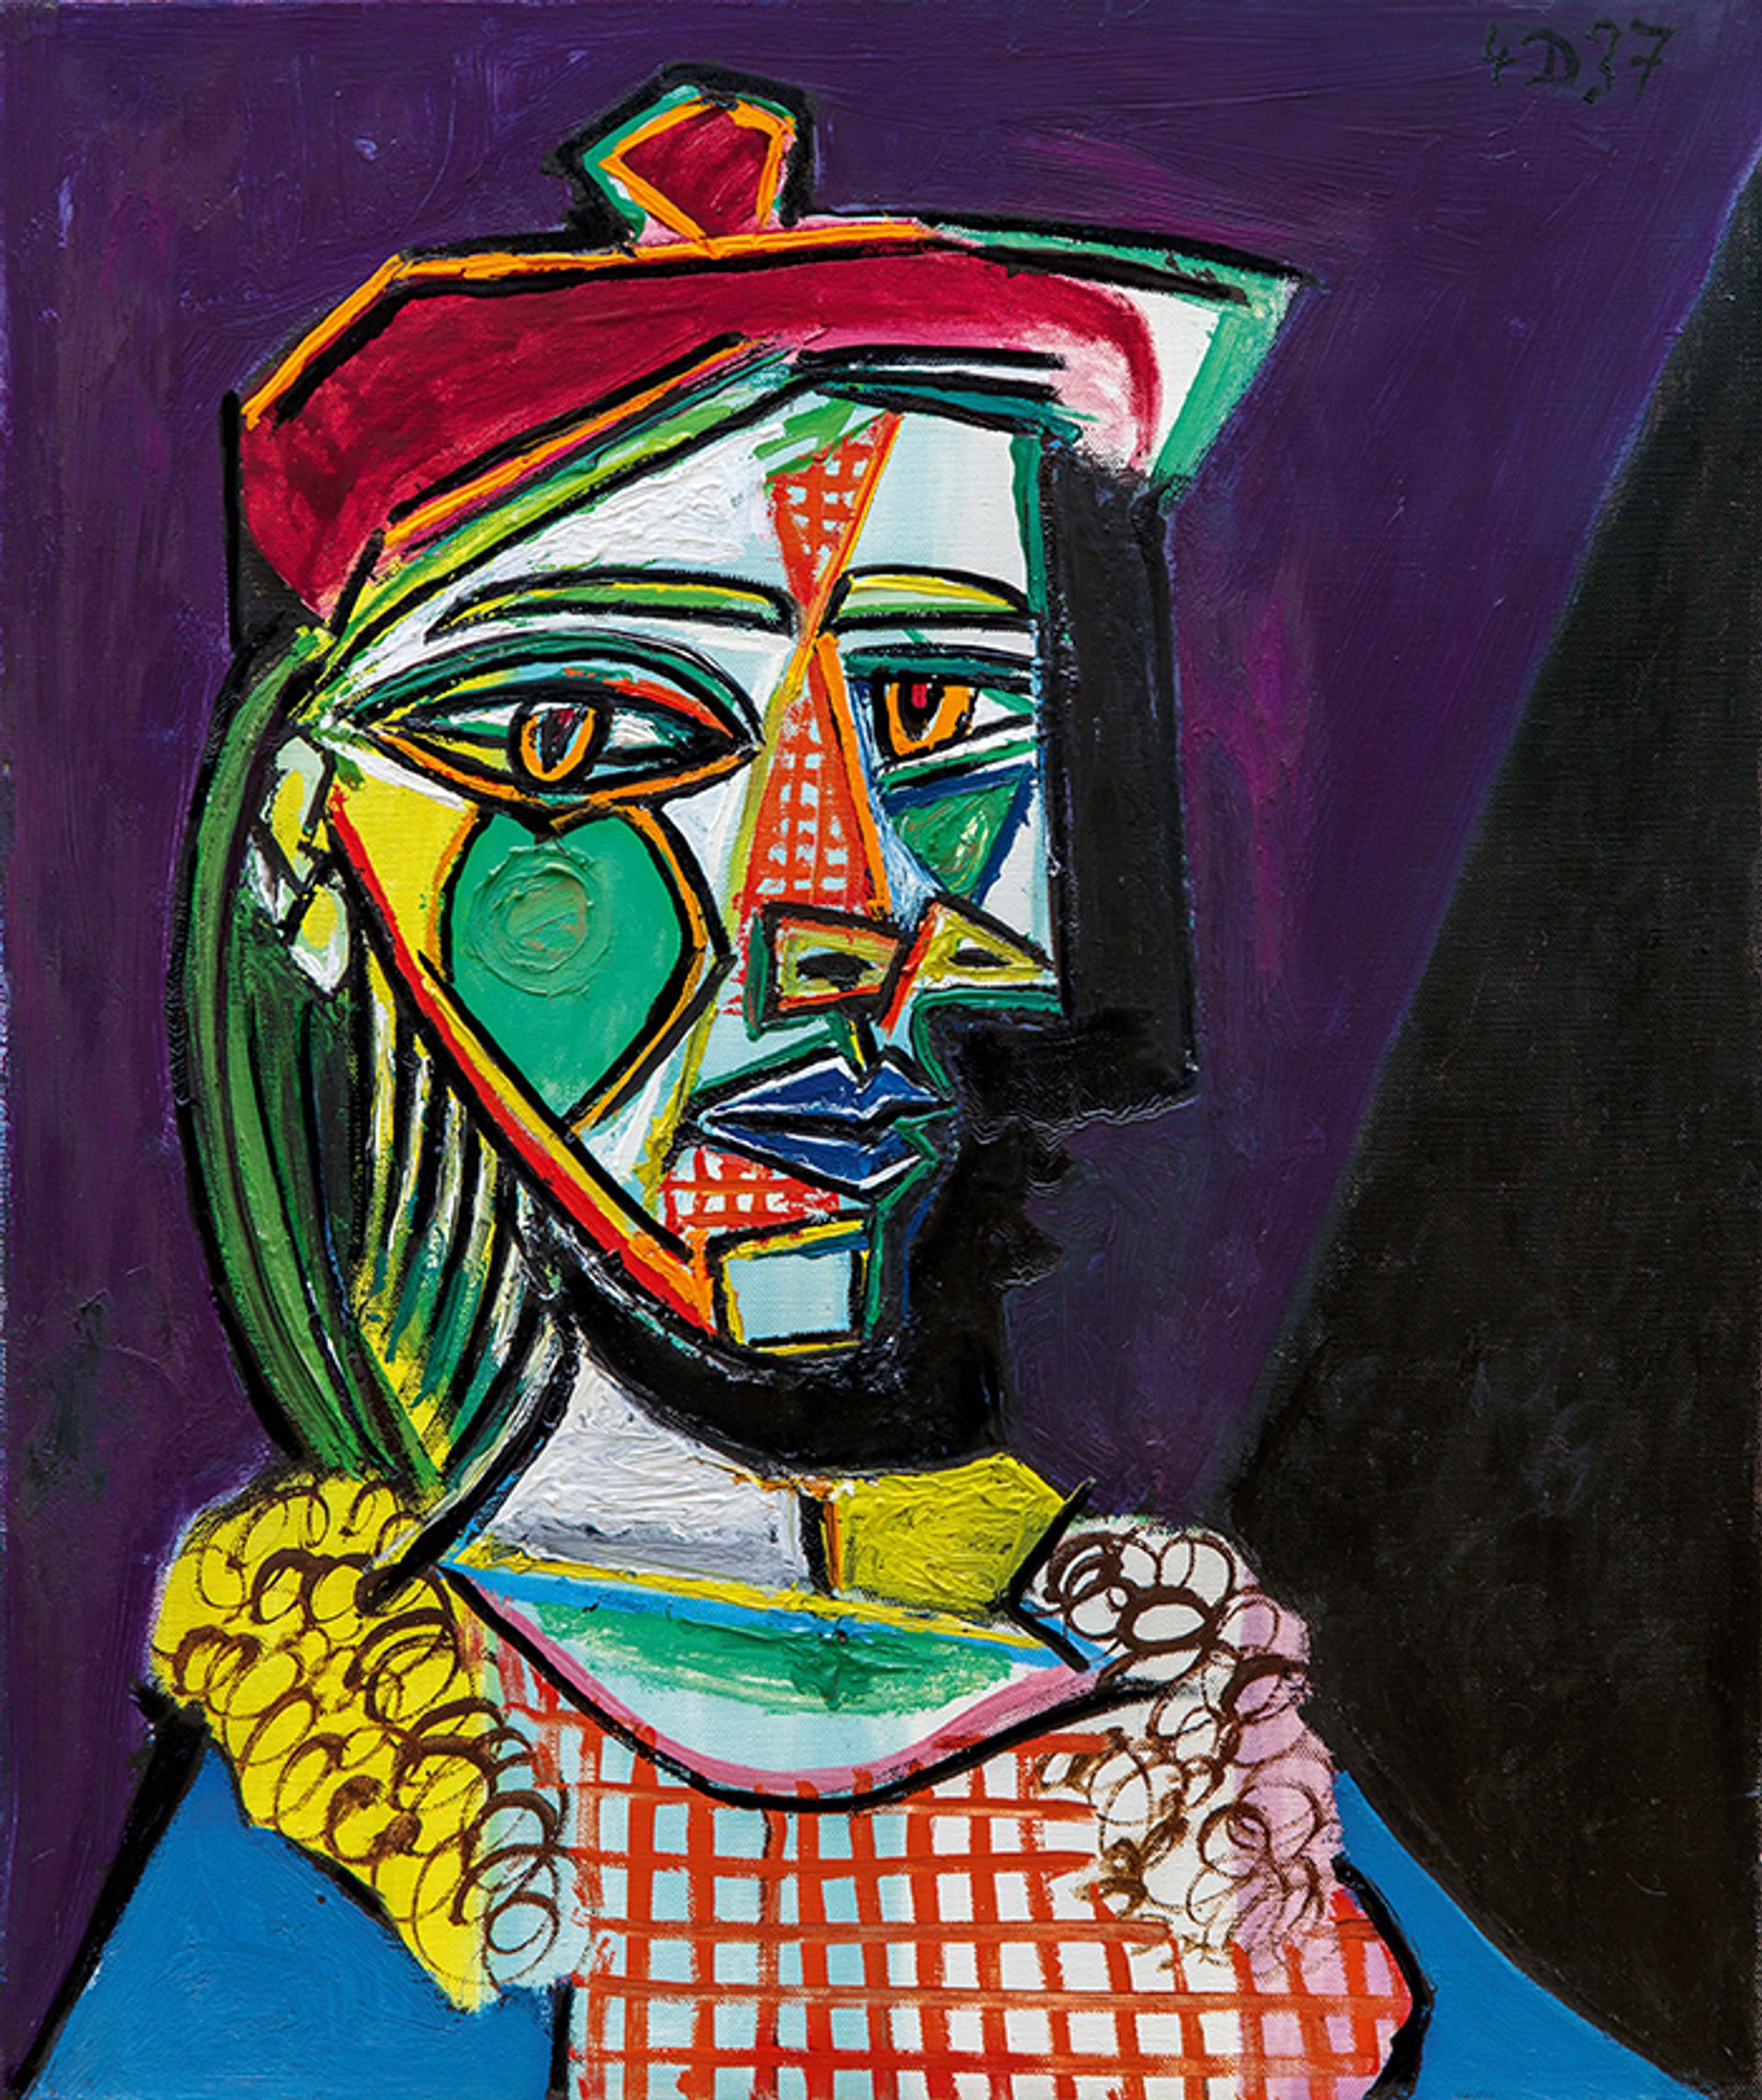 Picasso's Femme au béret et à la robe quadrillée (Marie-Thérèse Walter) (1937) will be offered at Sotheby's London in February Courtesy of Sotheby's